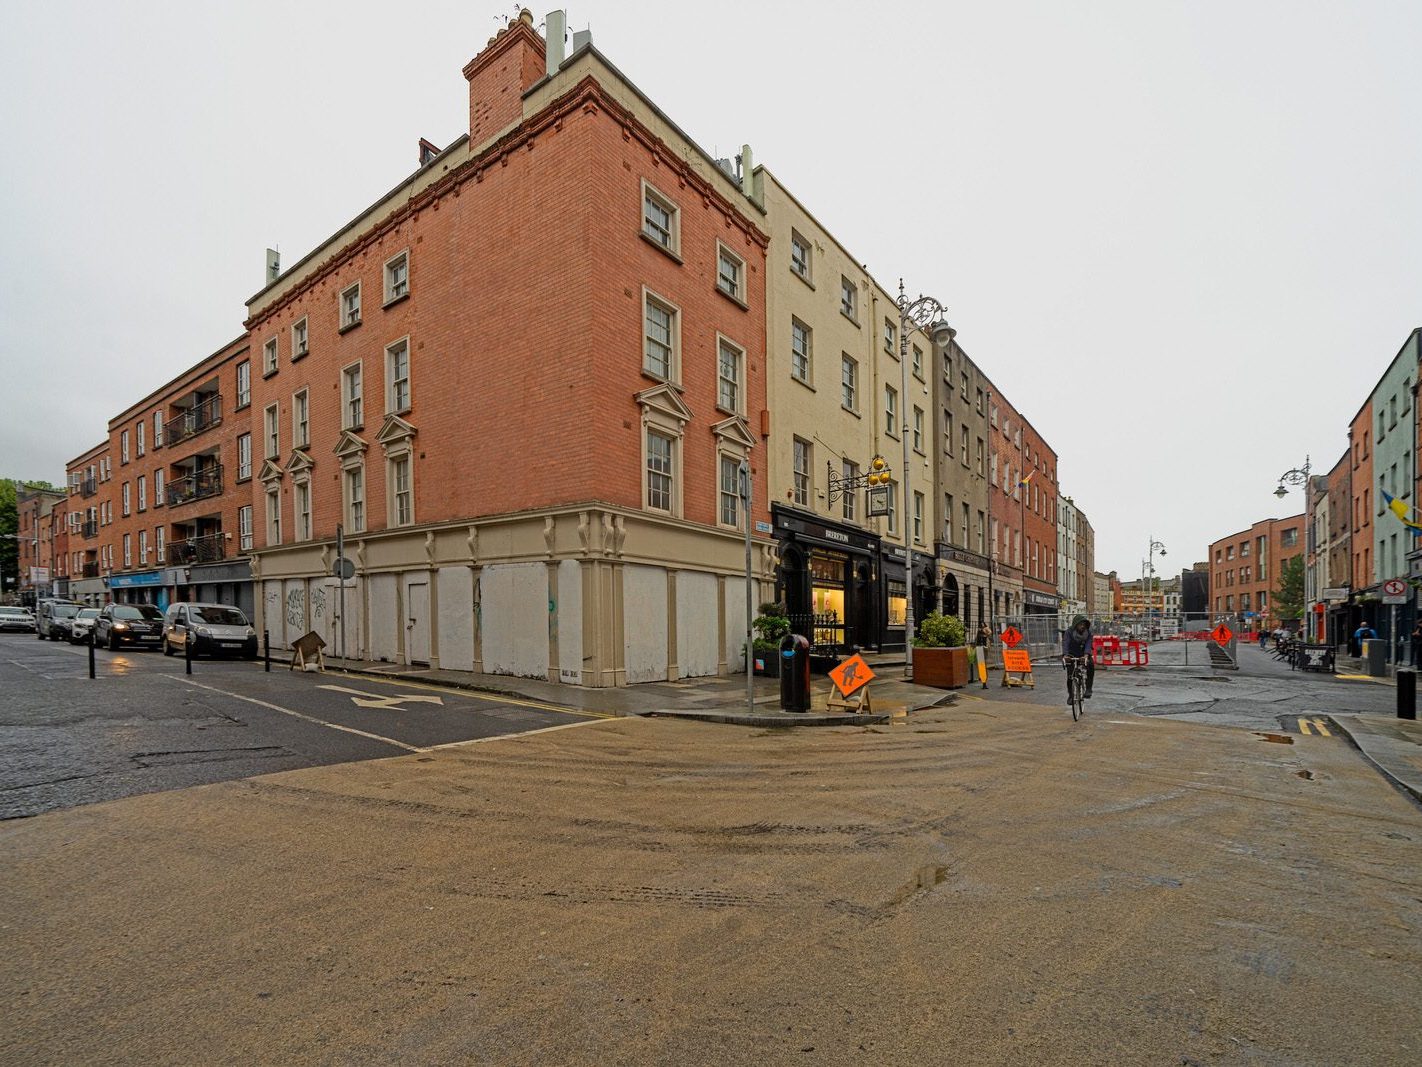 CAPEL STREET ON A DULL WET DAY [INTERIM CAPEL STREET IMPROVEMENT WORKS ARE NOW ONGOING] 032